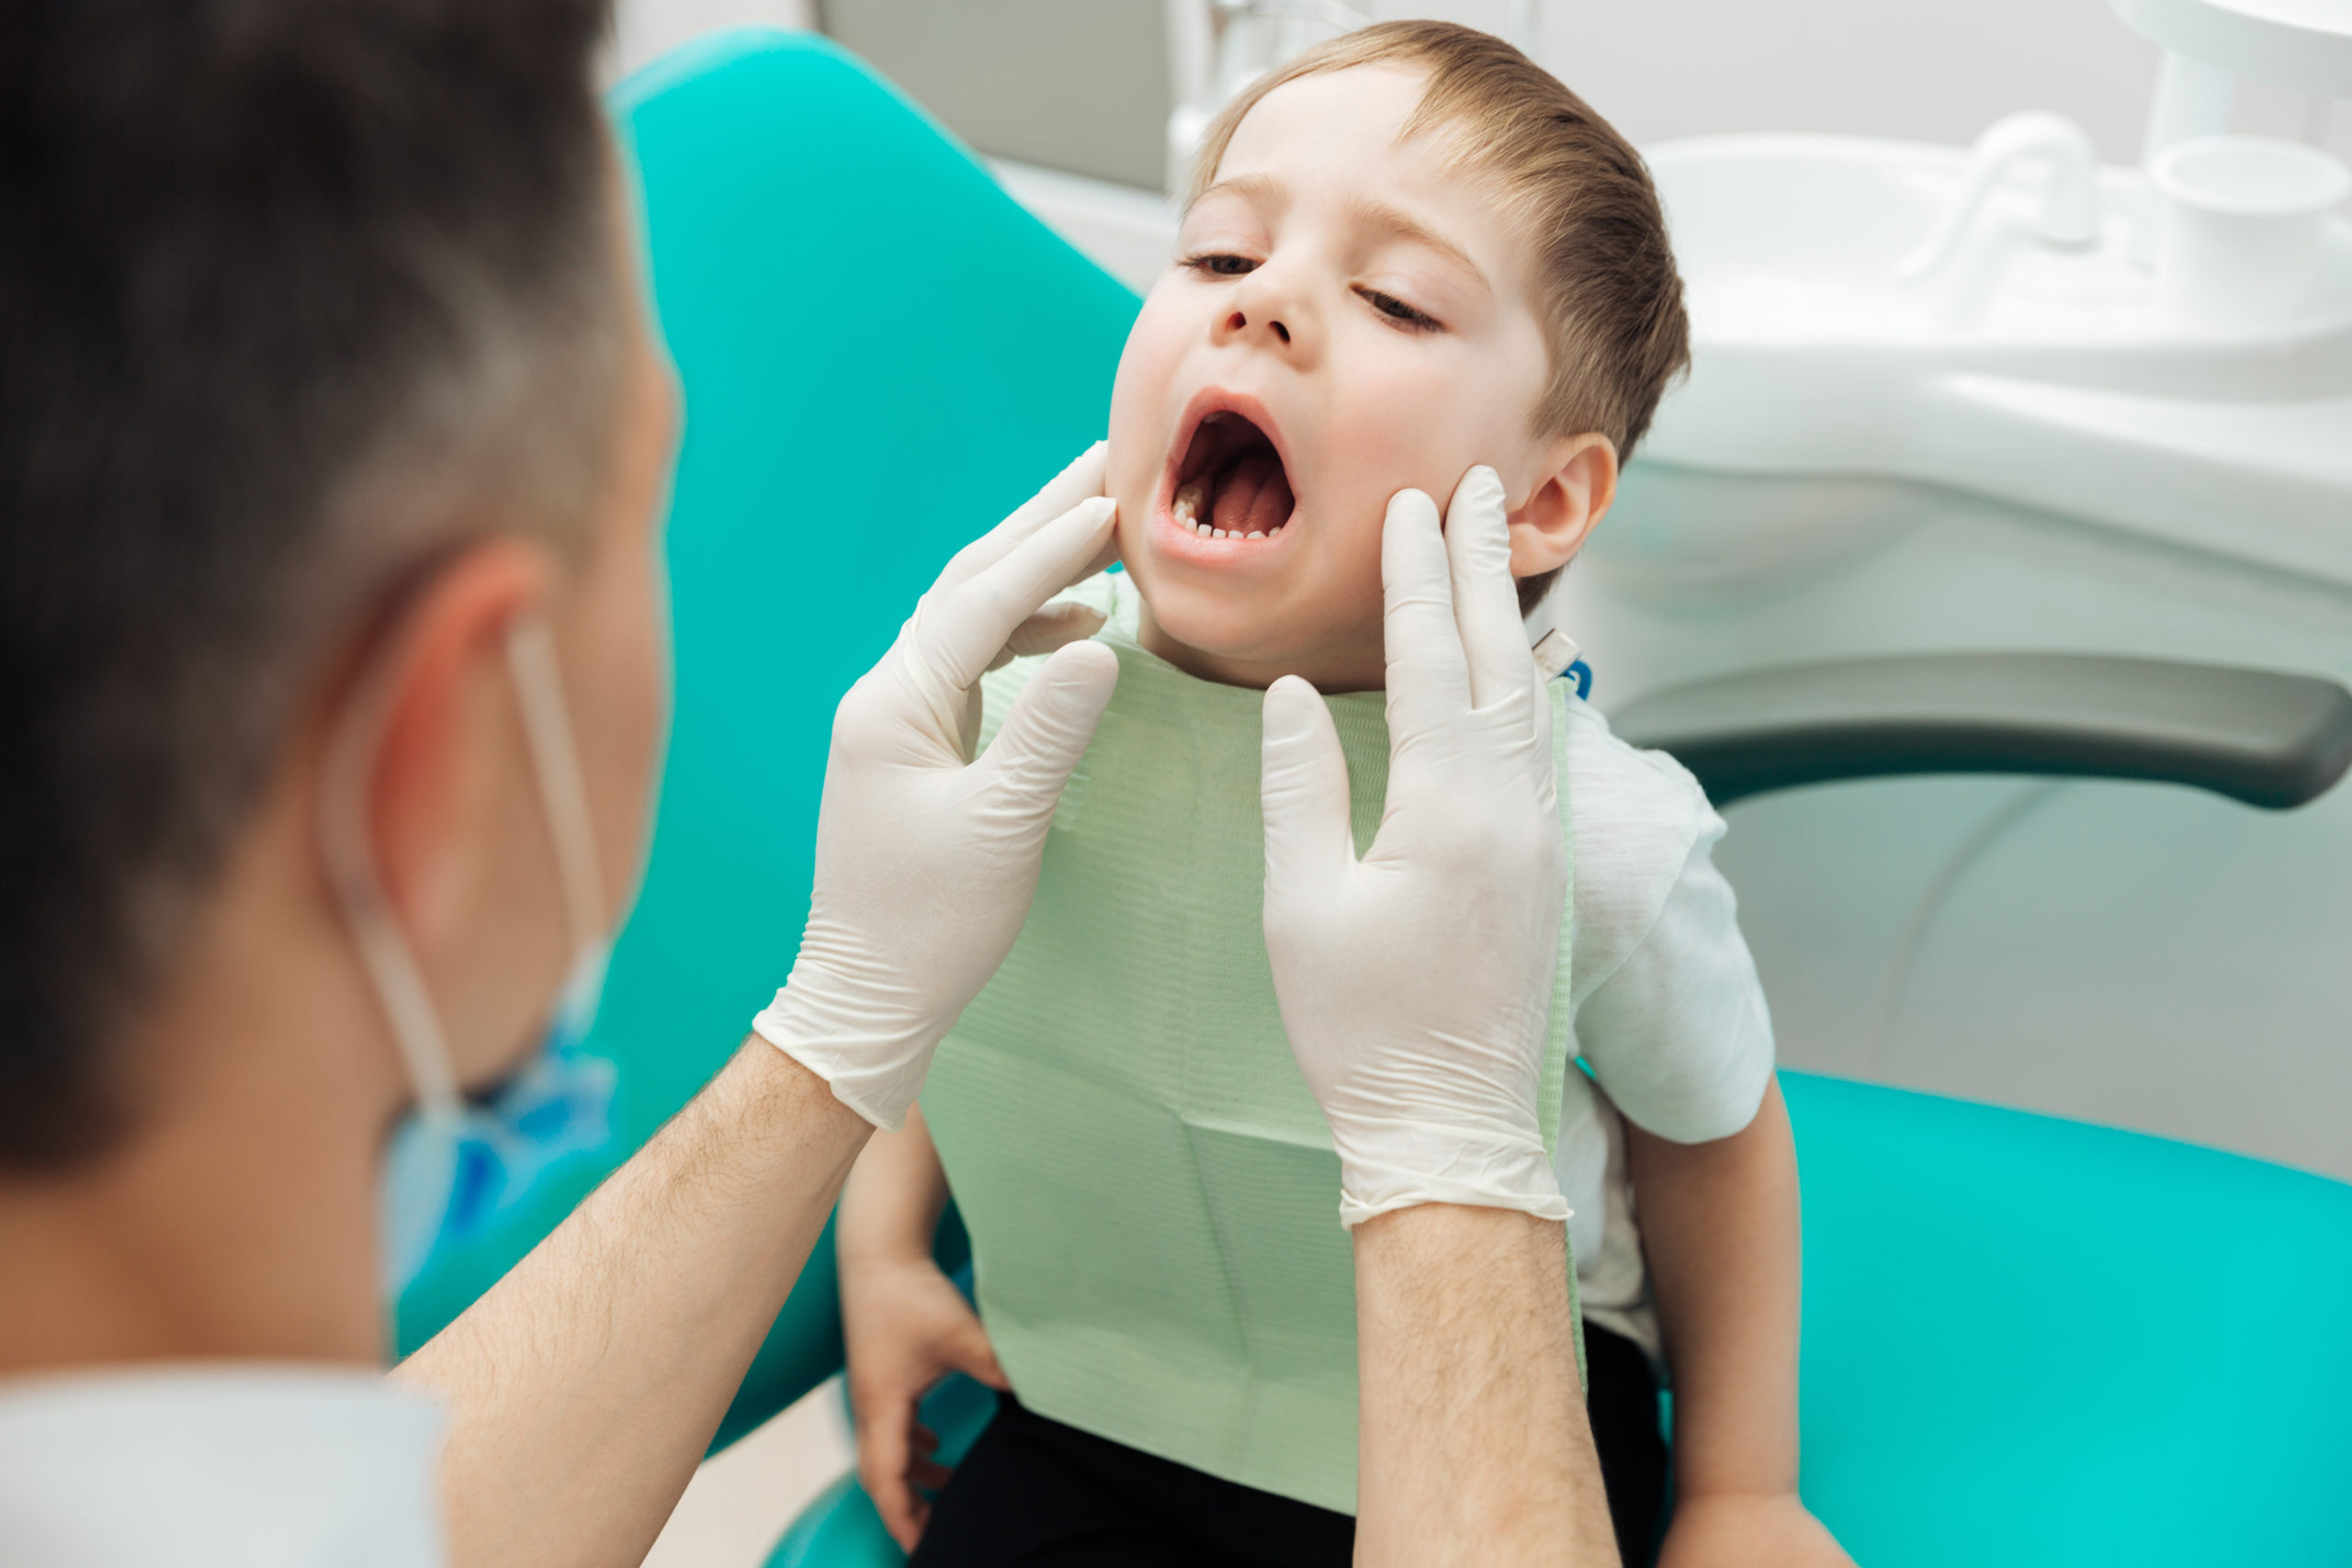 Dentist examining teeth of little boy witting with mouth opened